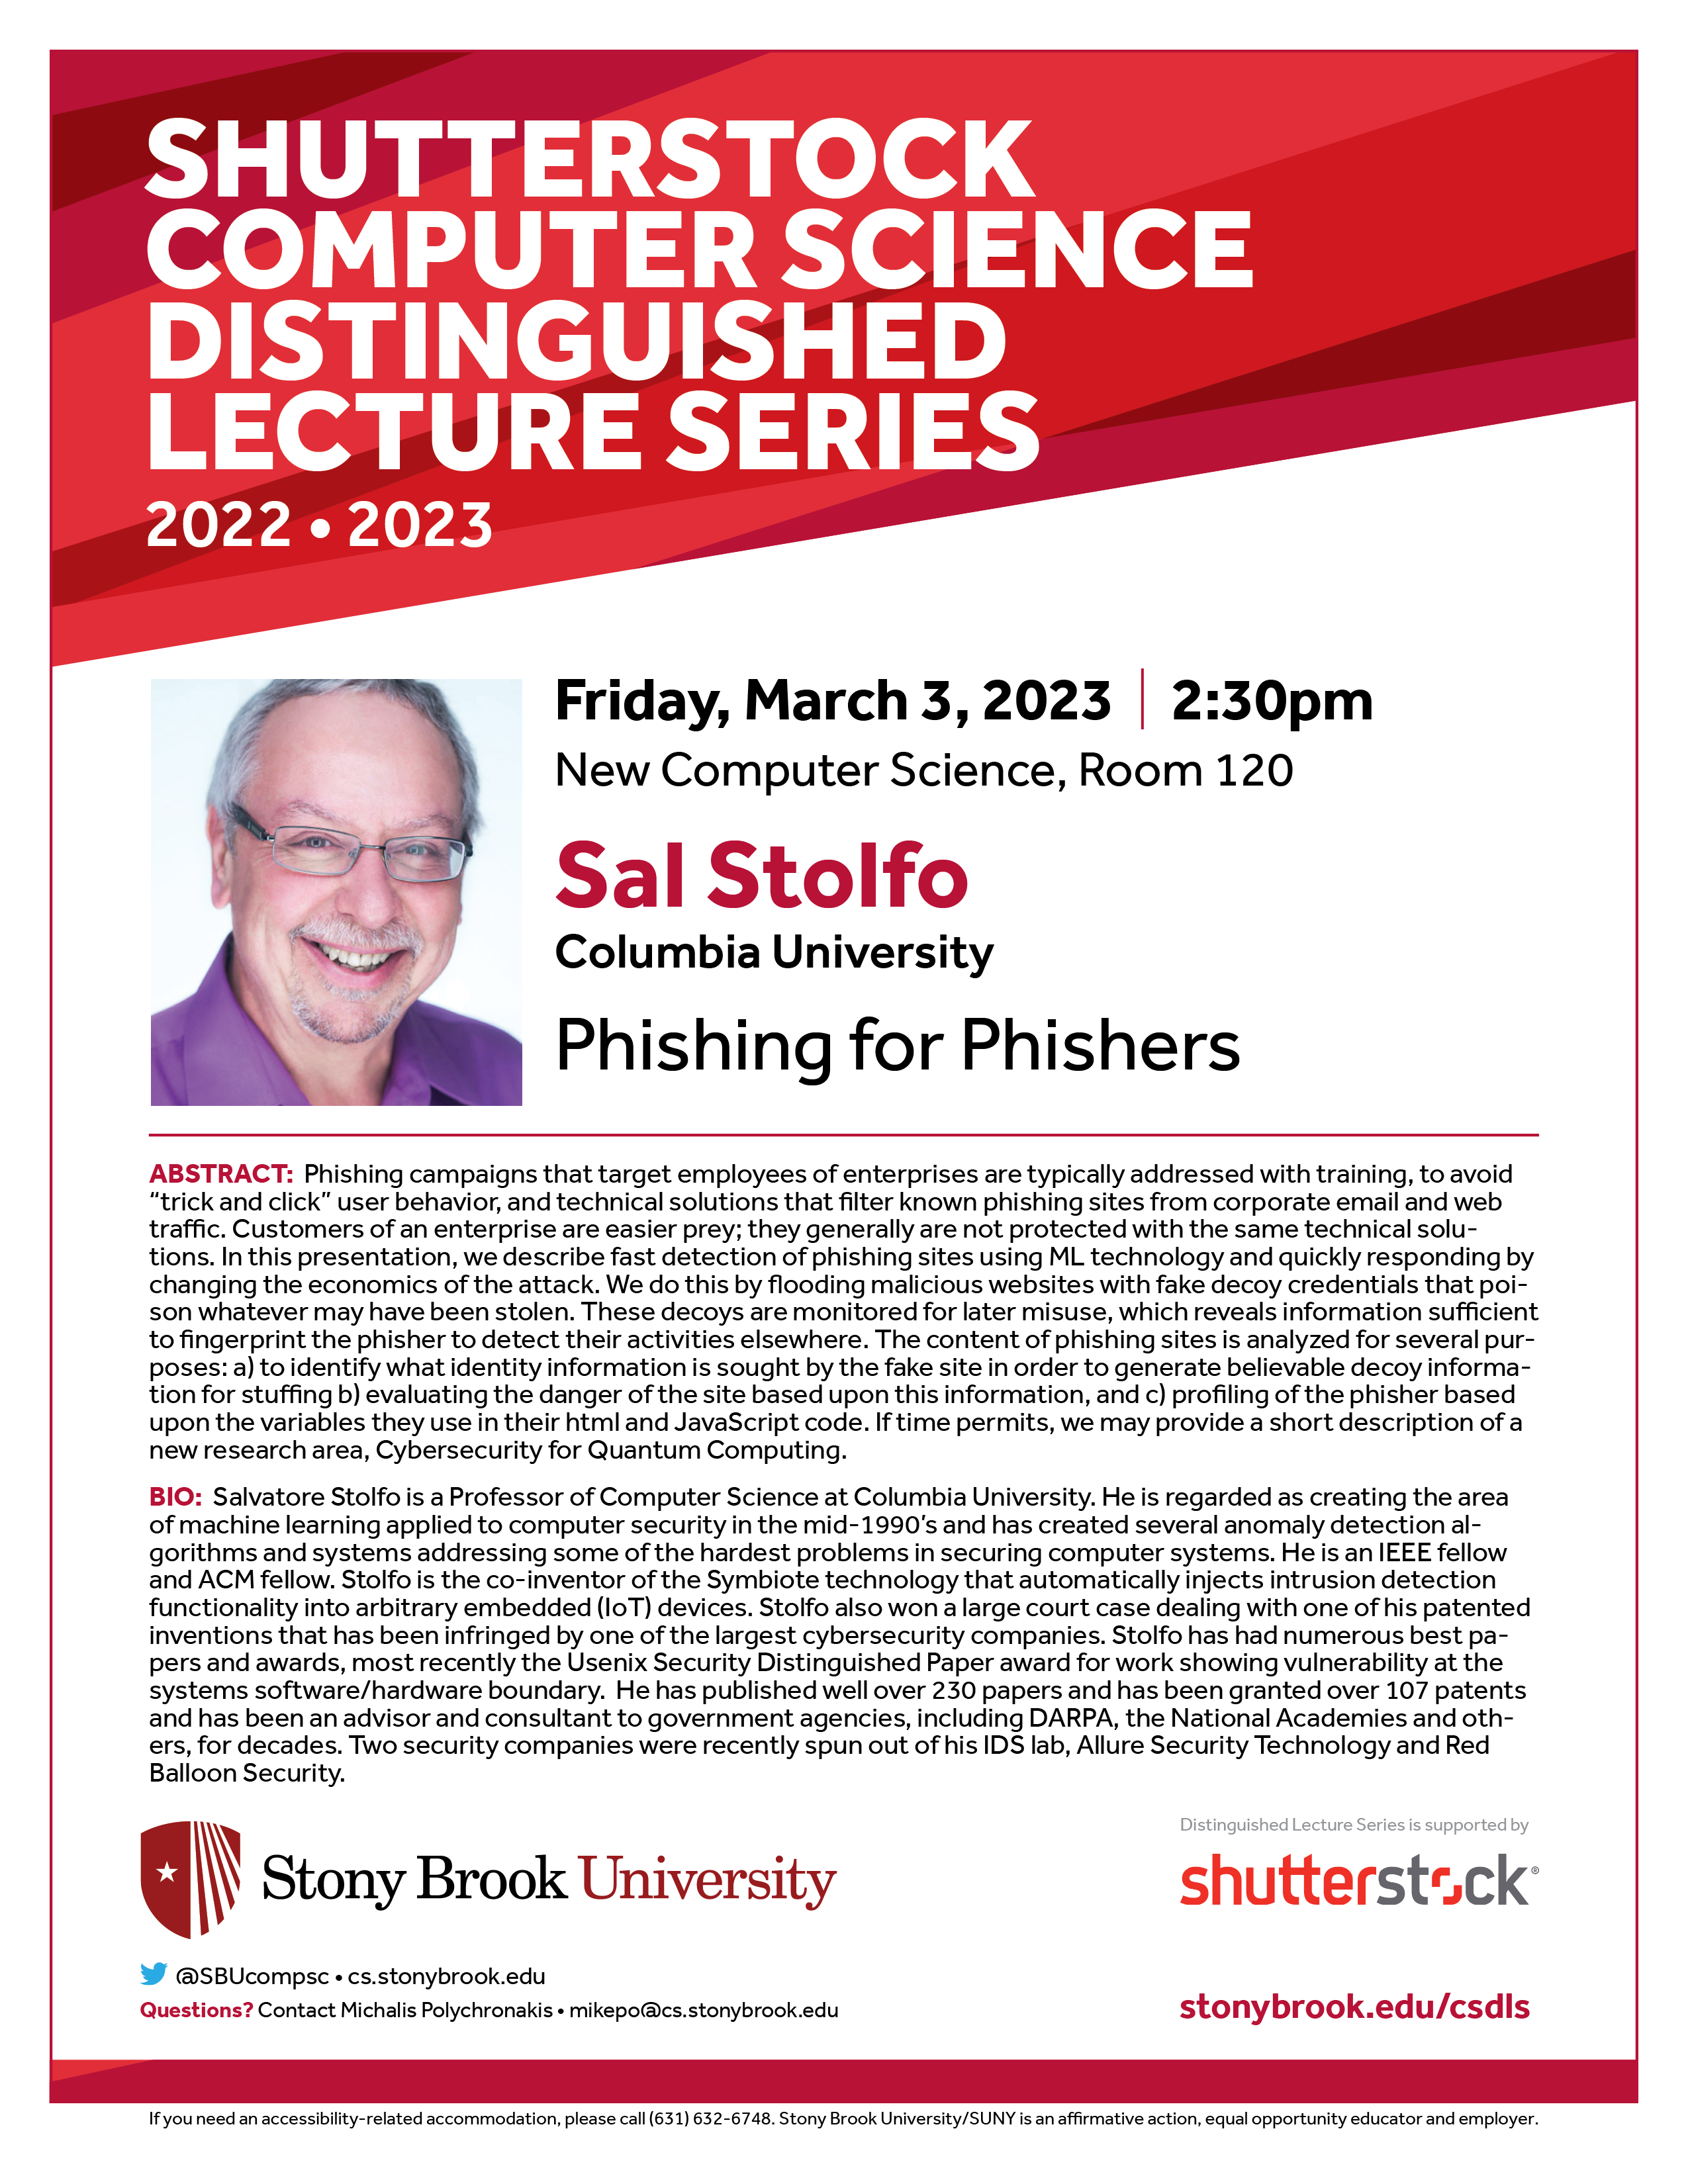 Join us March 3 for the lecture Phishing for Phishers